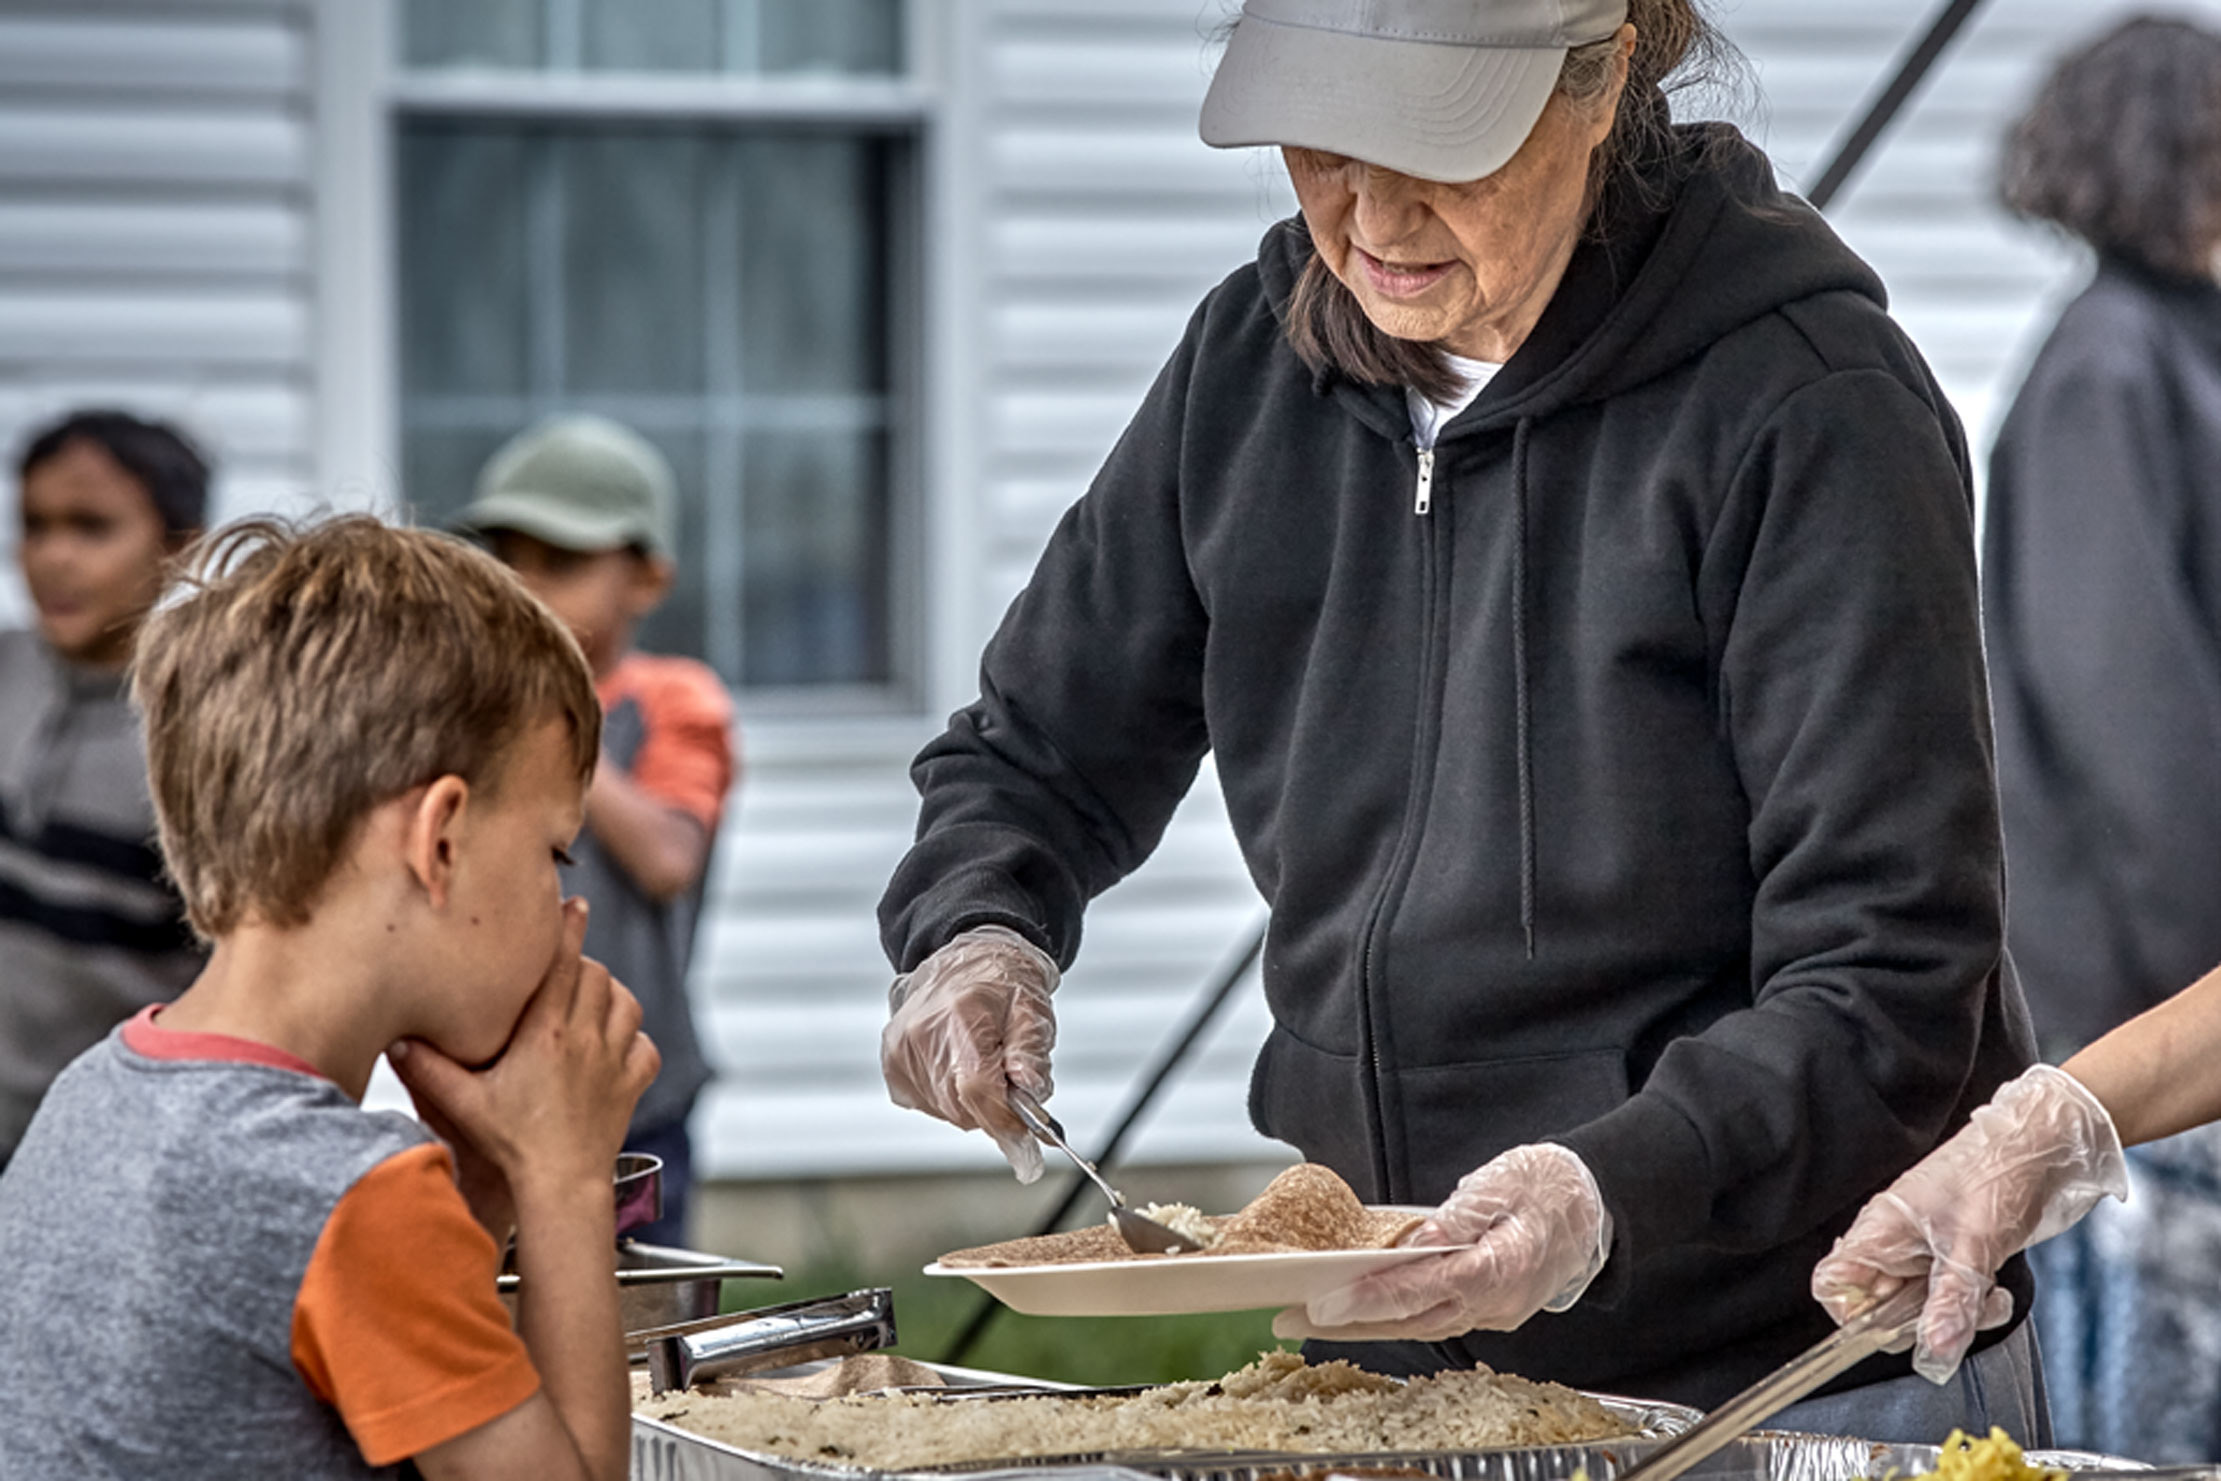  Lifestyle Portrait At West Salem Mission Campmeeting  Little Boy Wearing Orange And Gray Tee Shirt Awaits Older Woman In Gray Cap And Black Sweat Shirt Preparing Food Plate